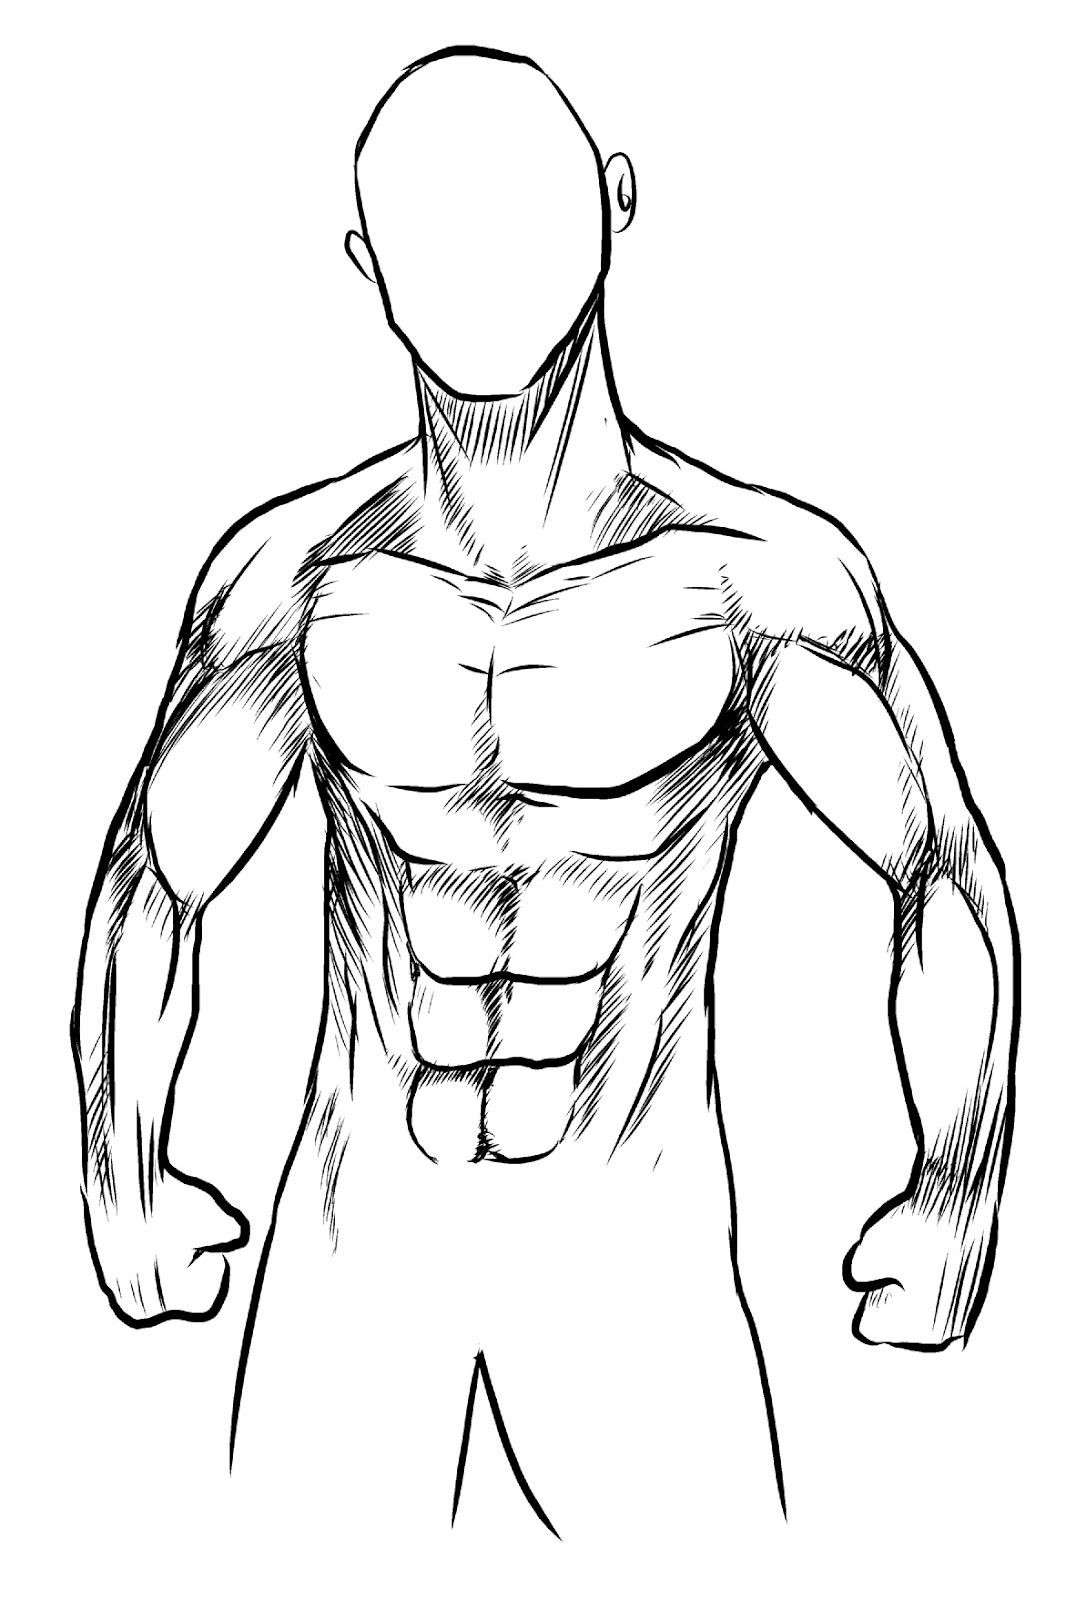 Man Body Drawing | Free download on ClipArtMag